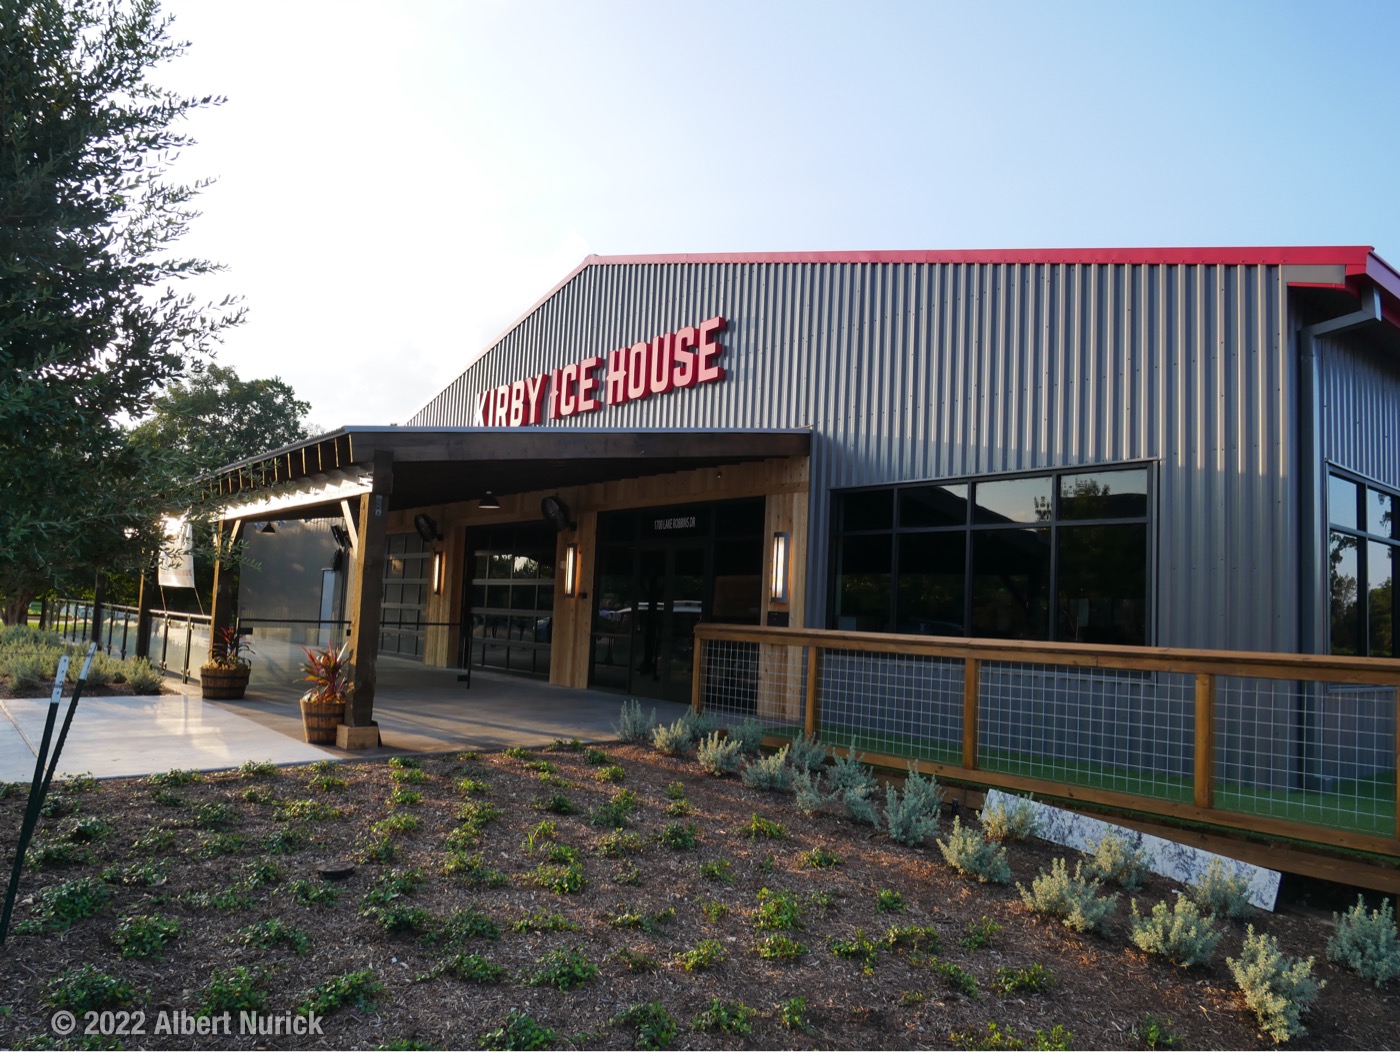 9 Things to Know About Kirby Ice House in the Woodlands, Home to